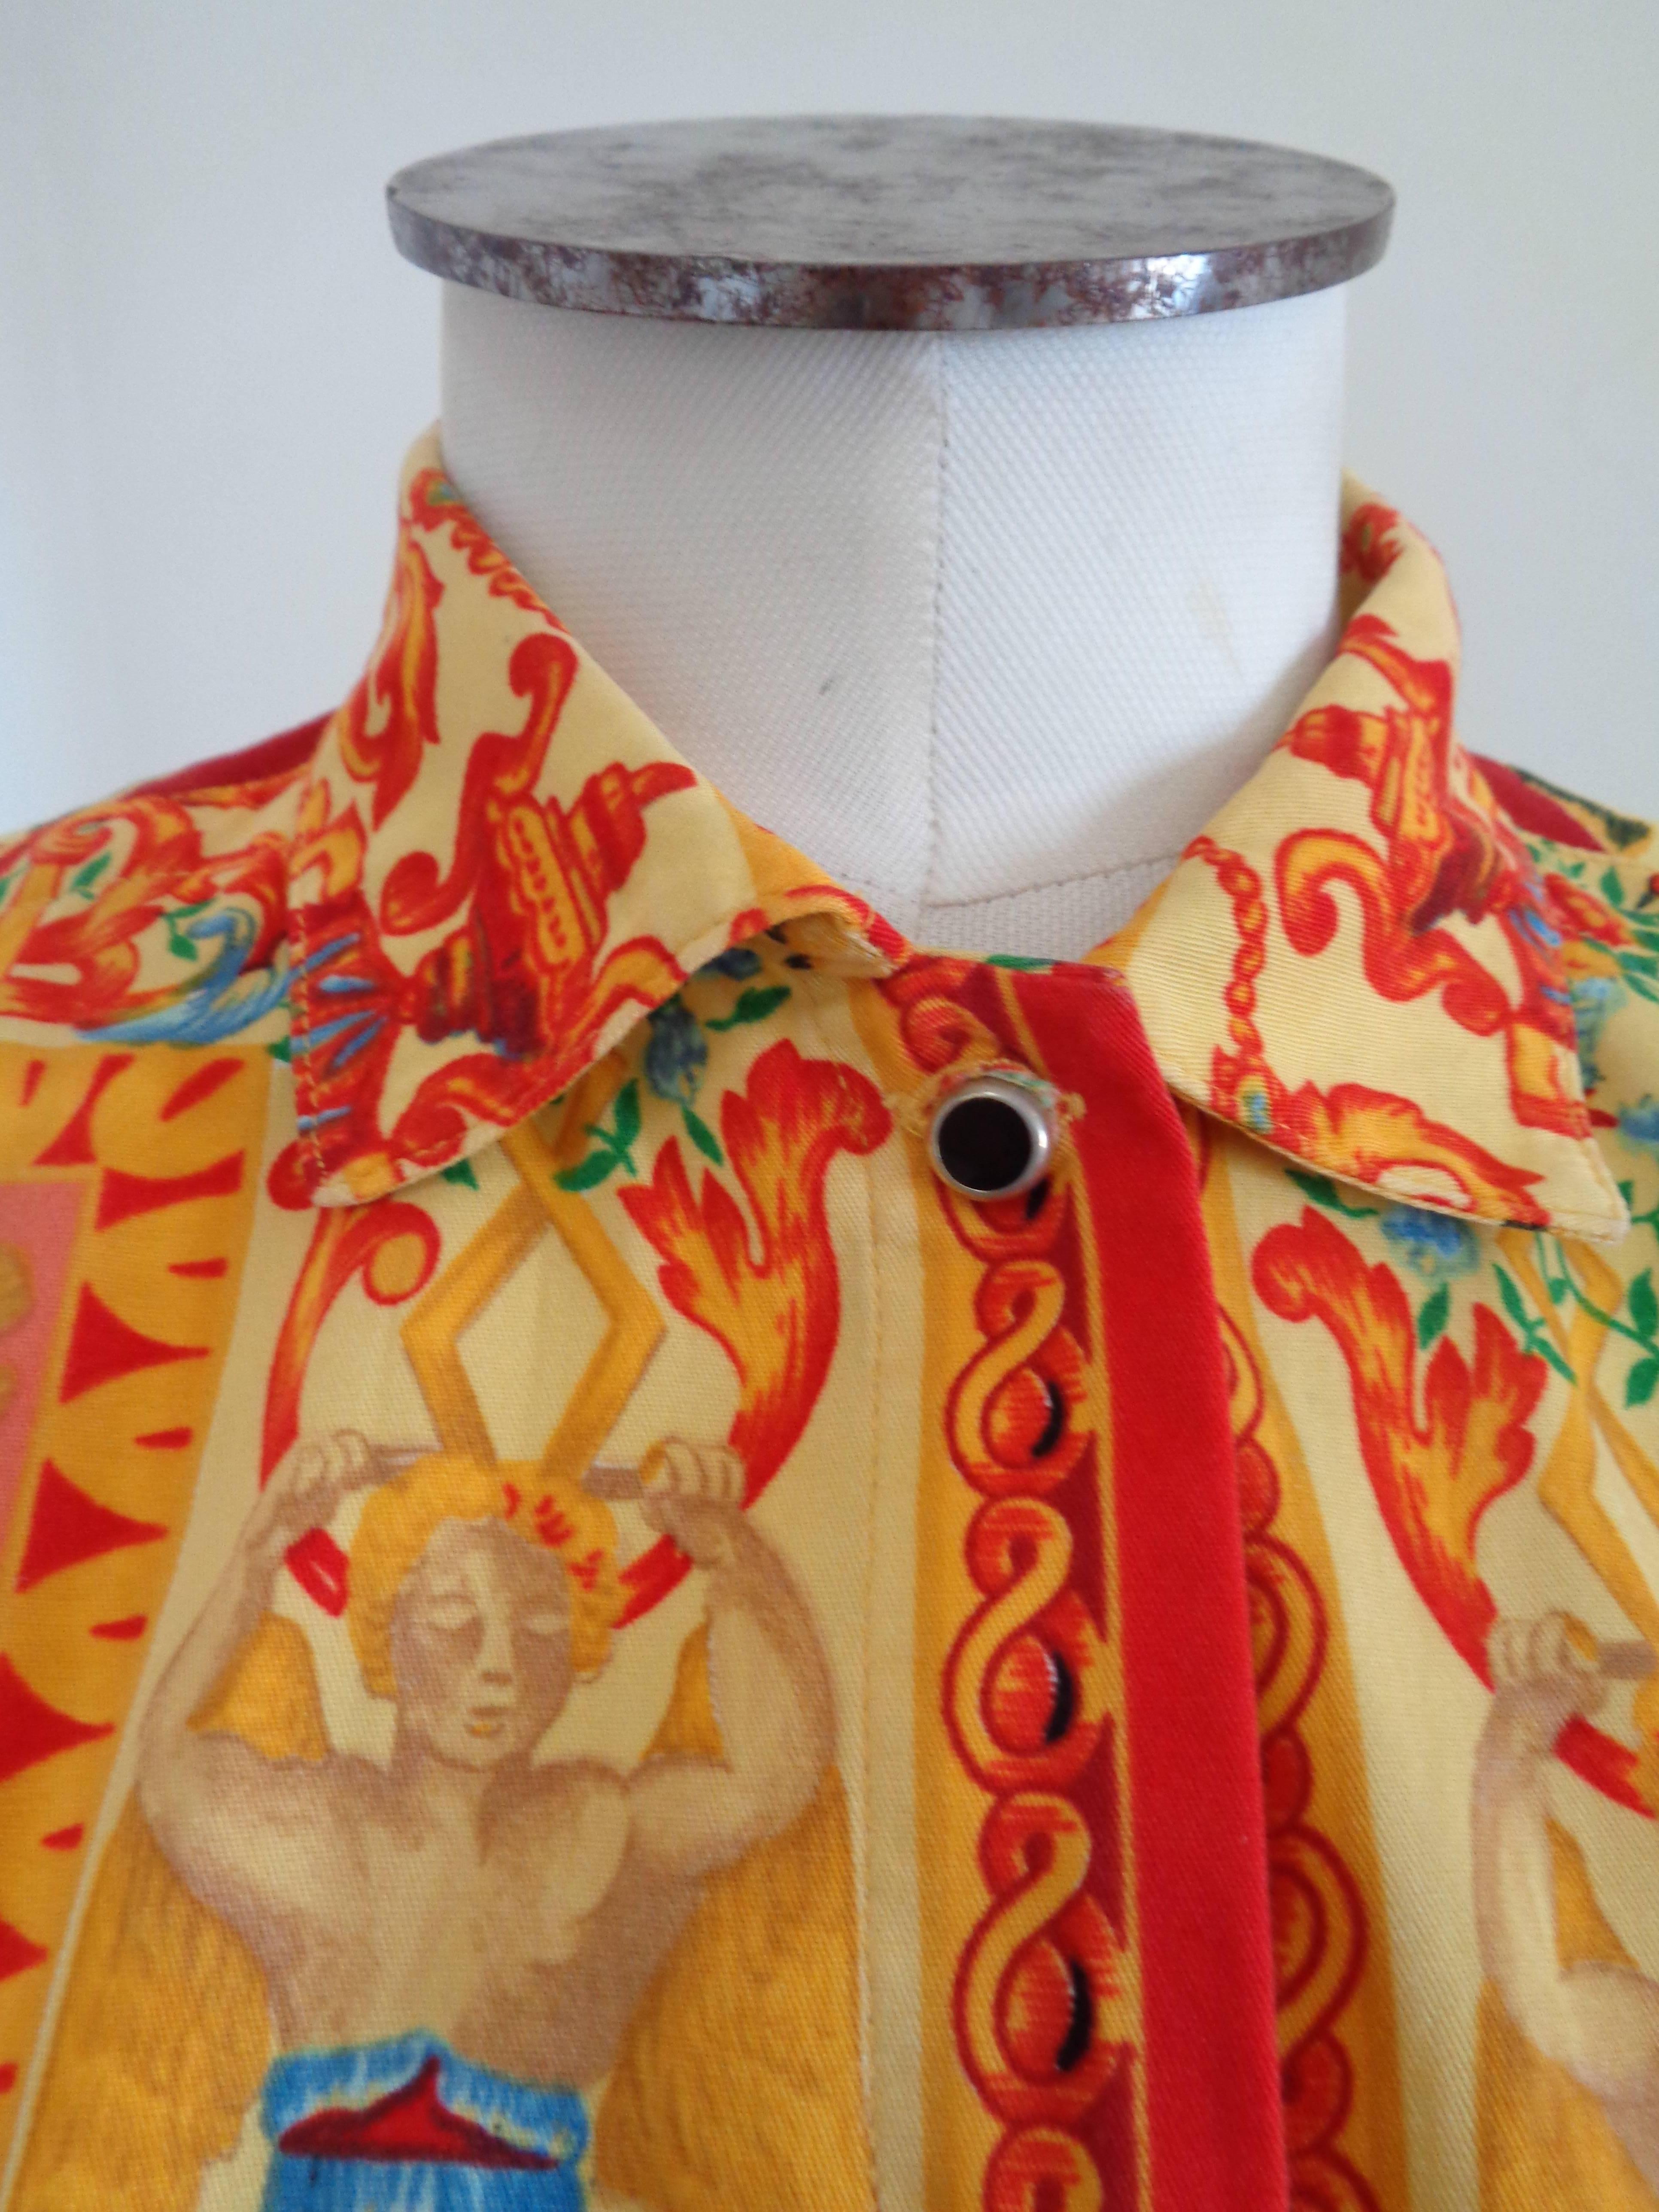 Versus by Gianni Versace Shirt In Good Condition In Capri, IT